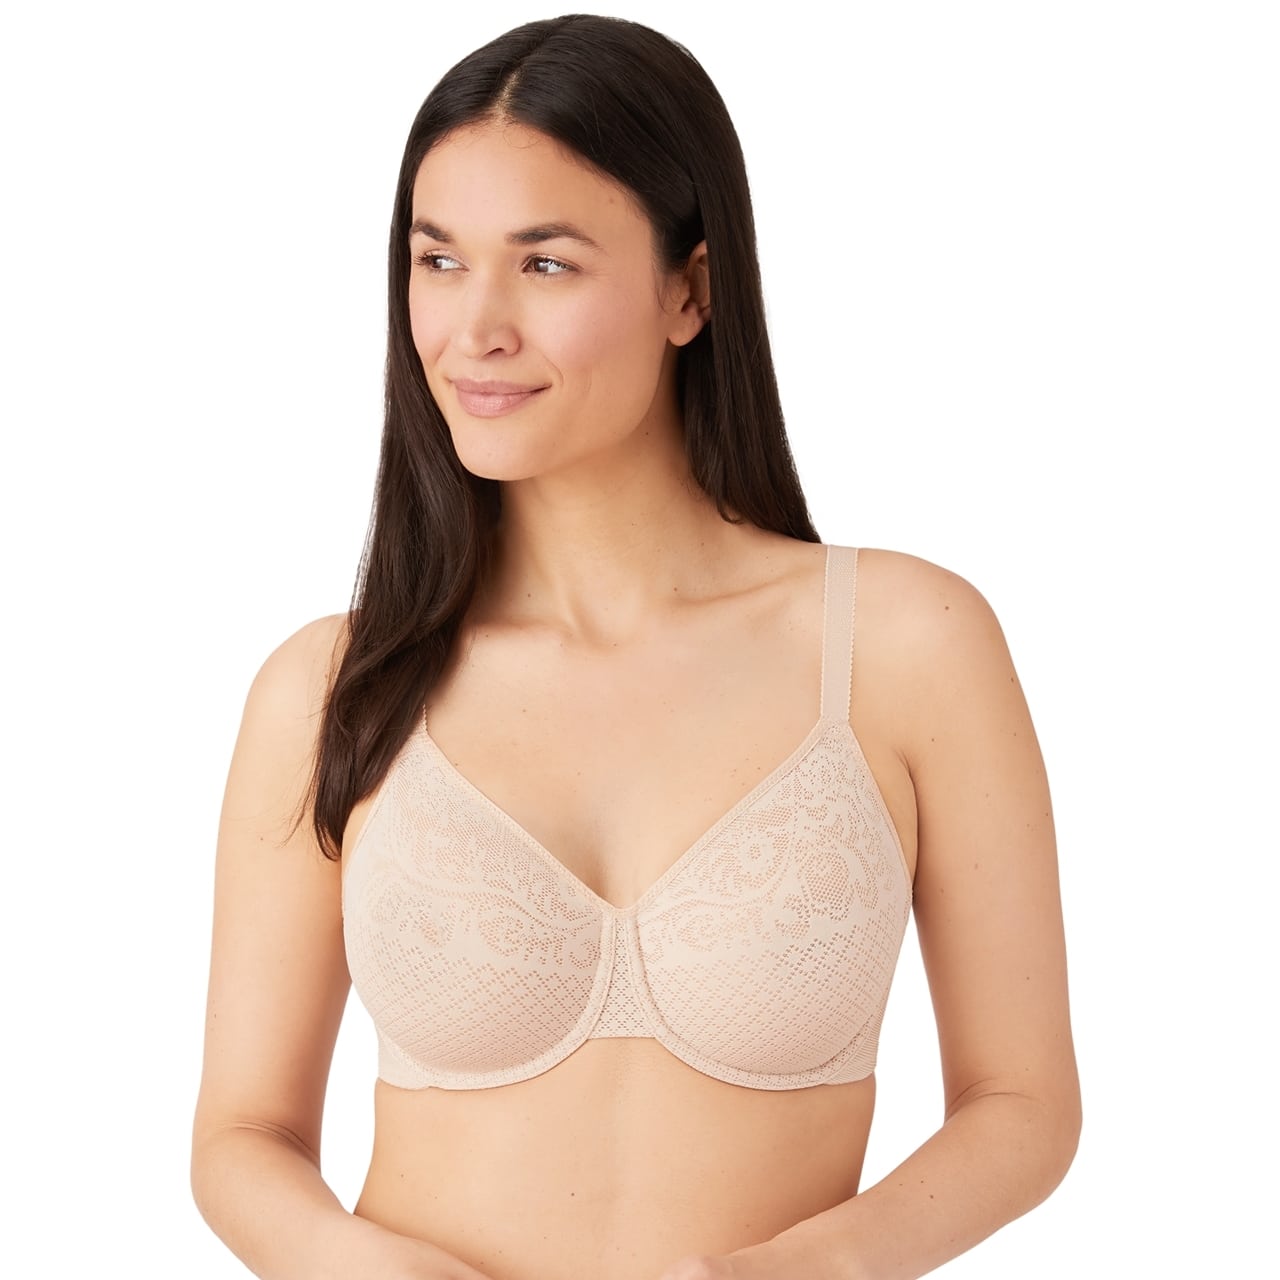 Wacoal September Bra of the Month - Visual Effects Minimizer .20 